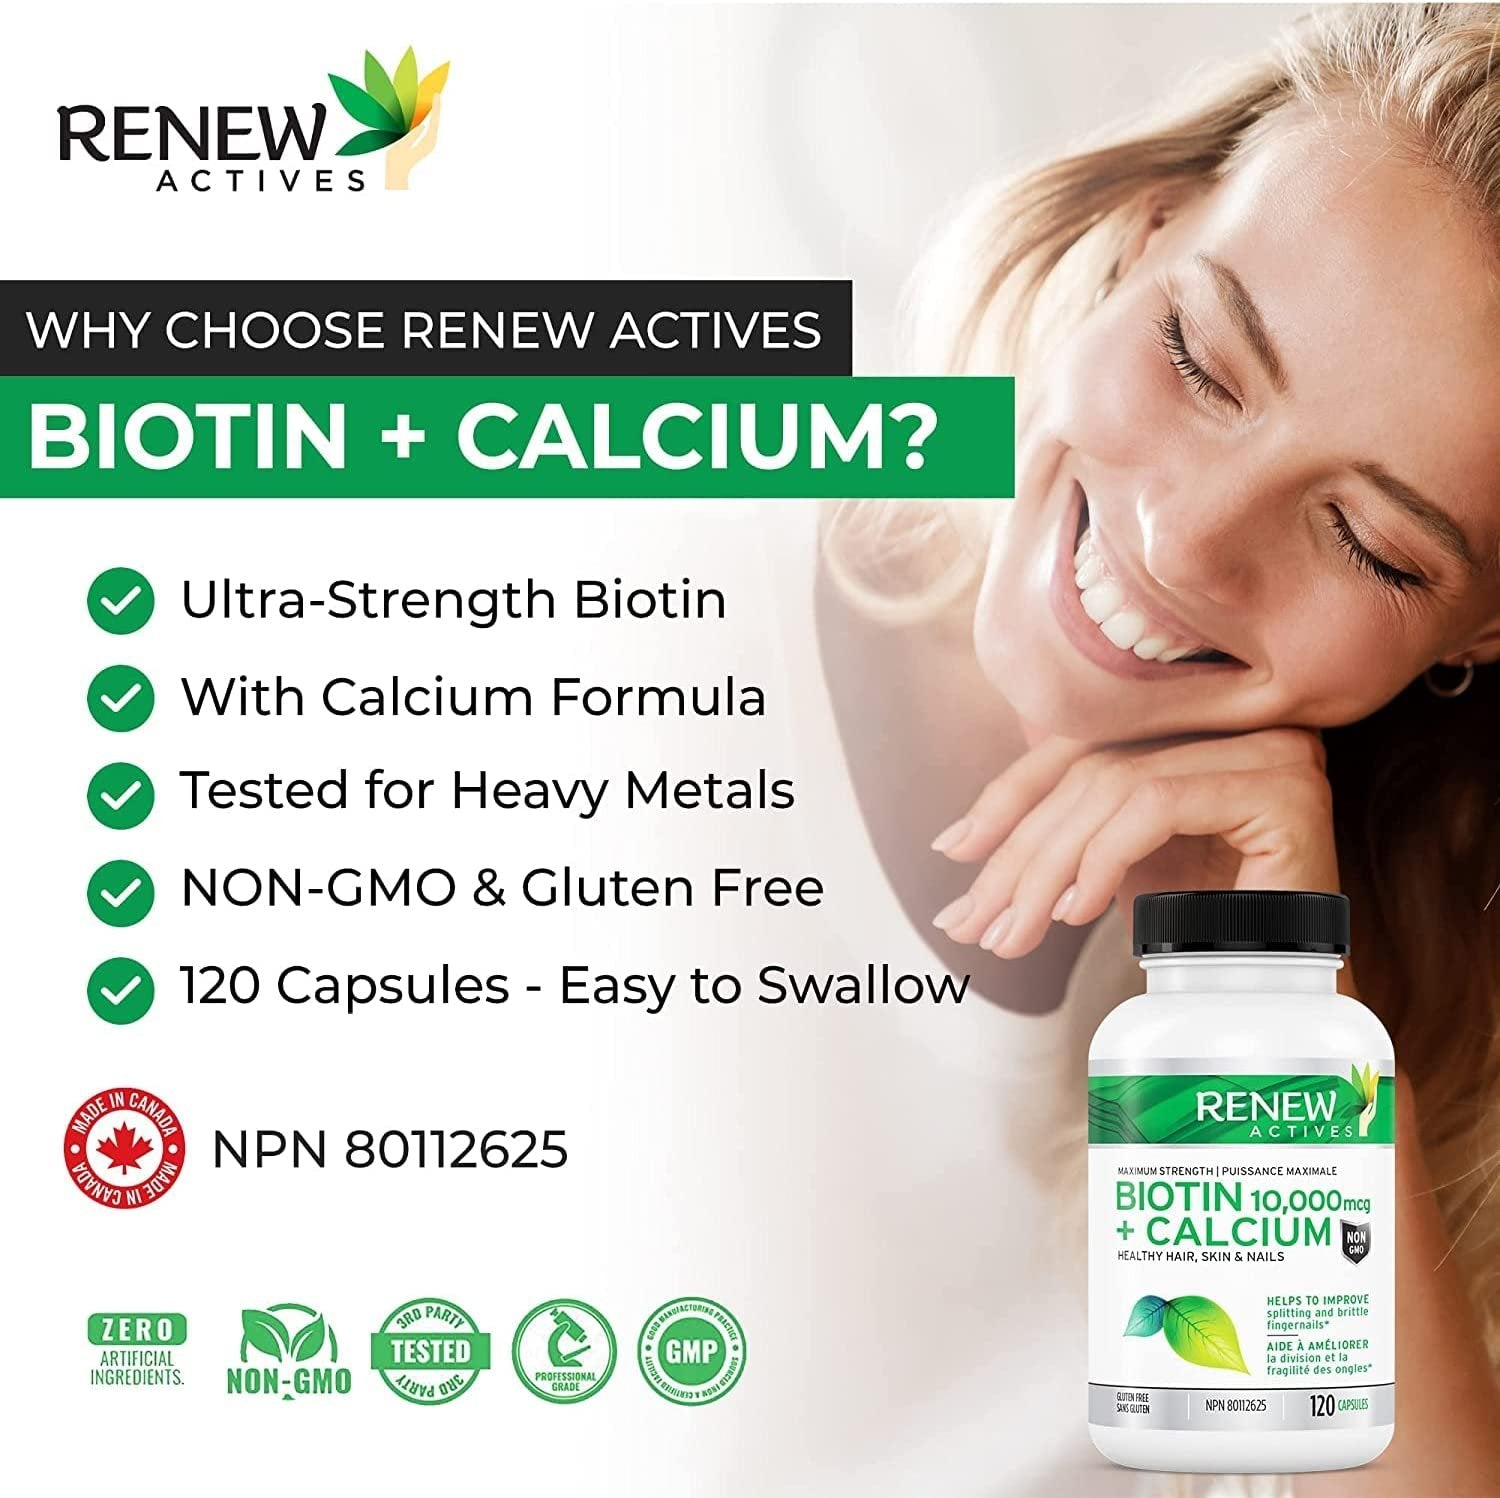 Renew Actives New Biotin & Calcium 10000mcg Supplement - for Healthy Hair Skin & Nails